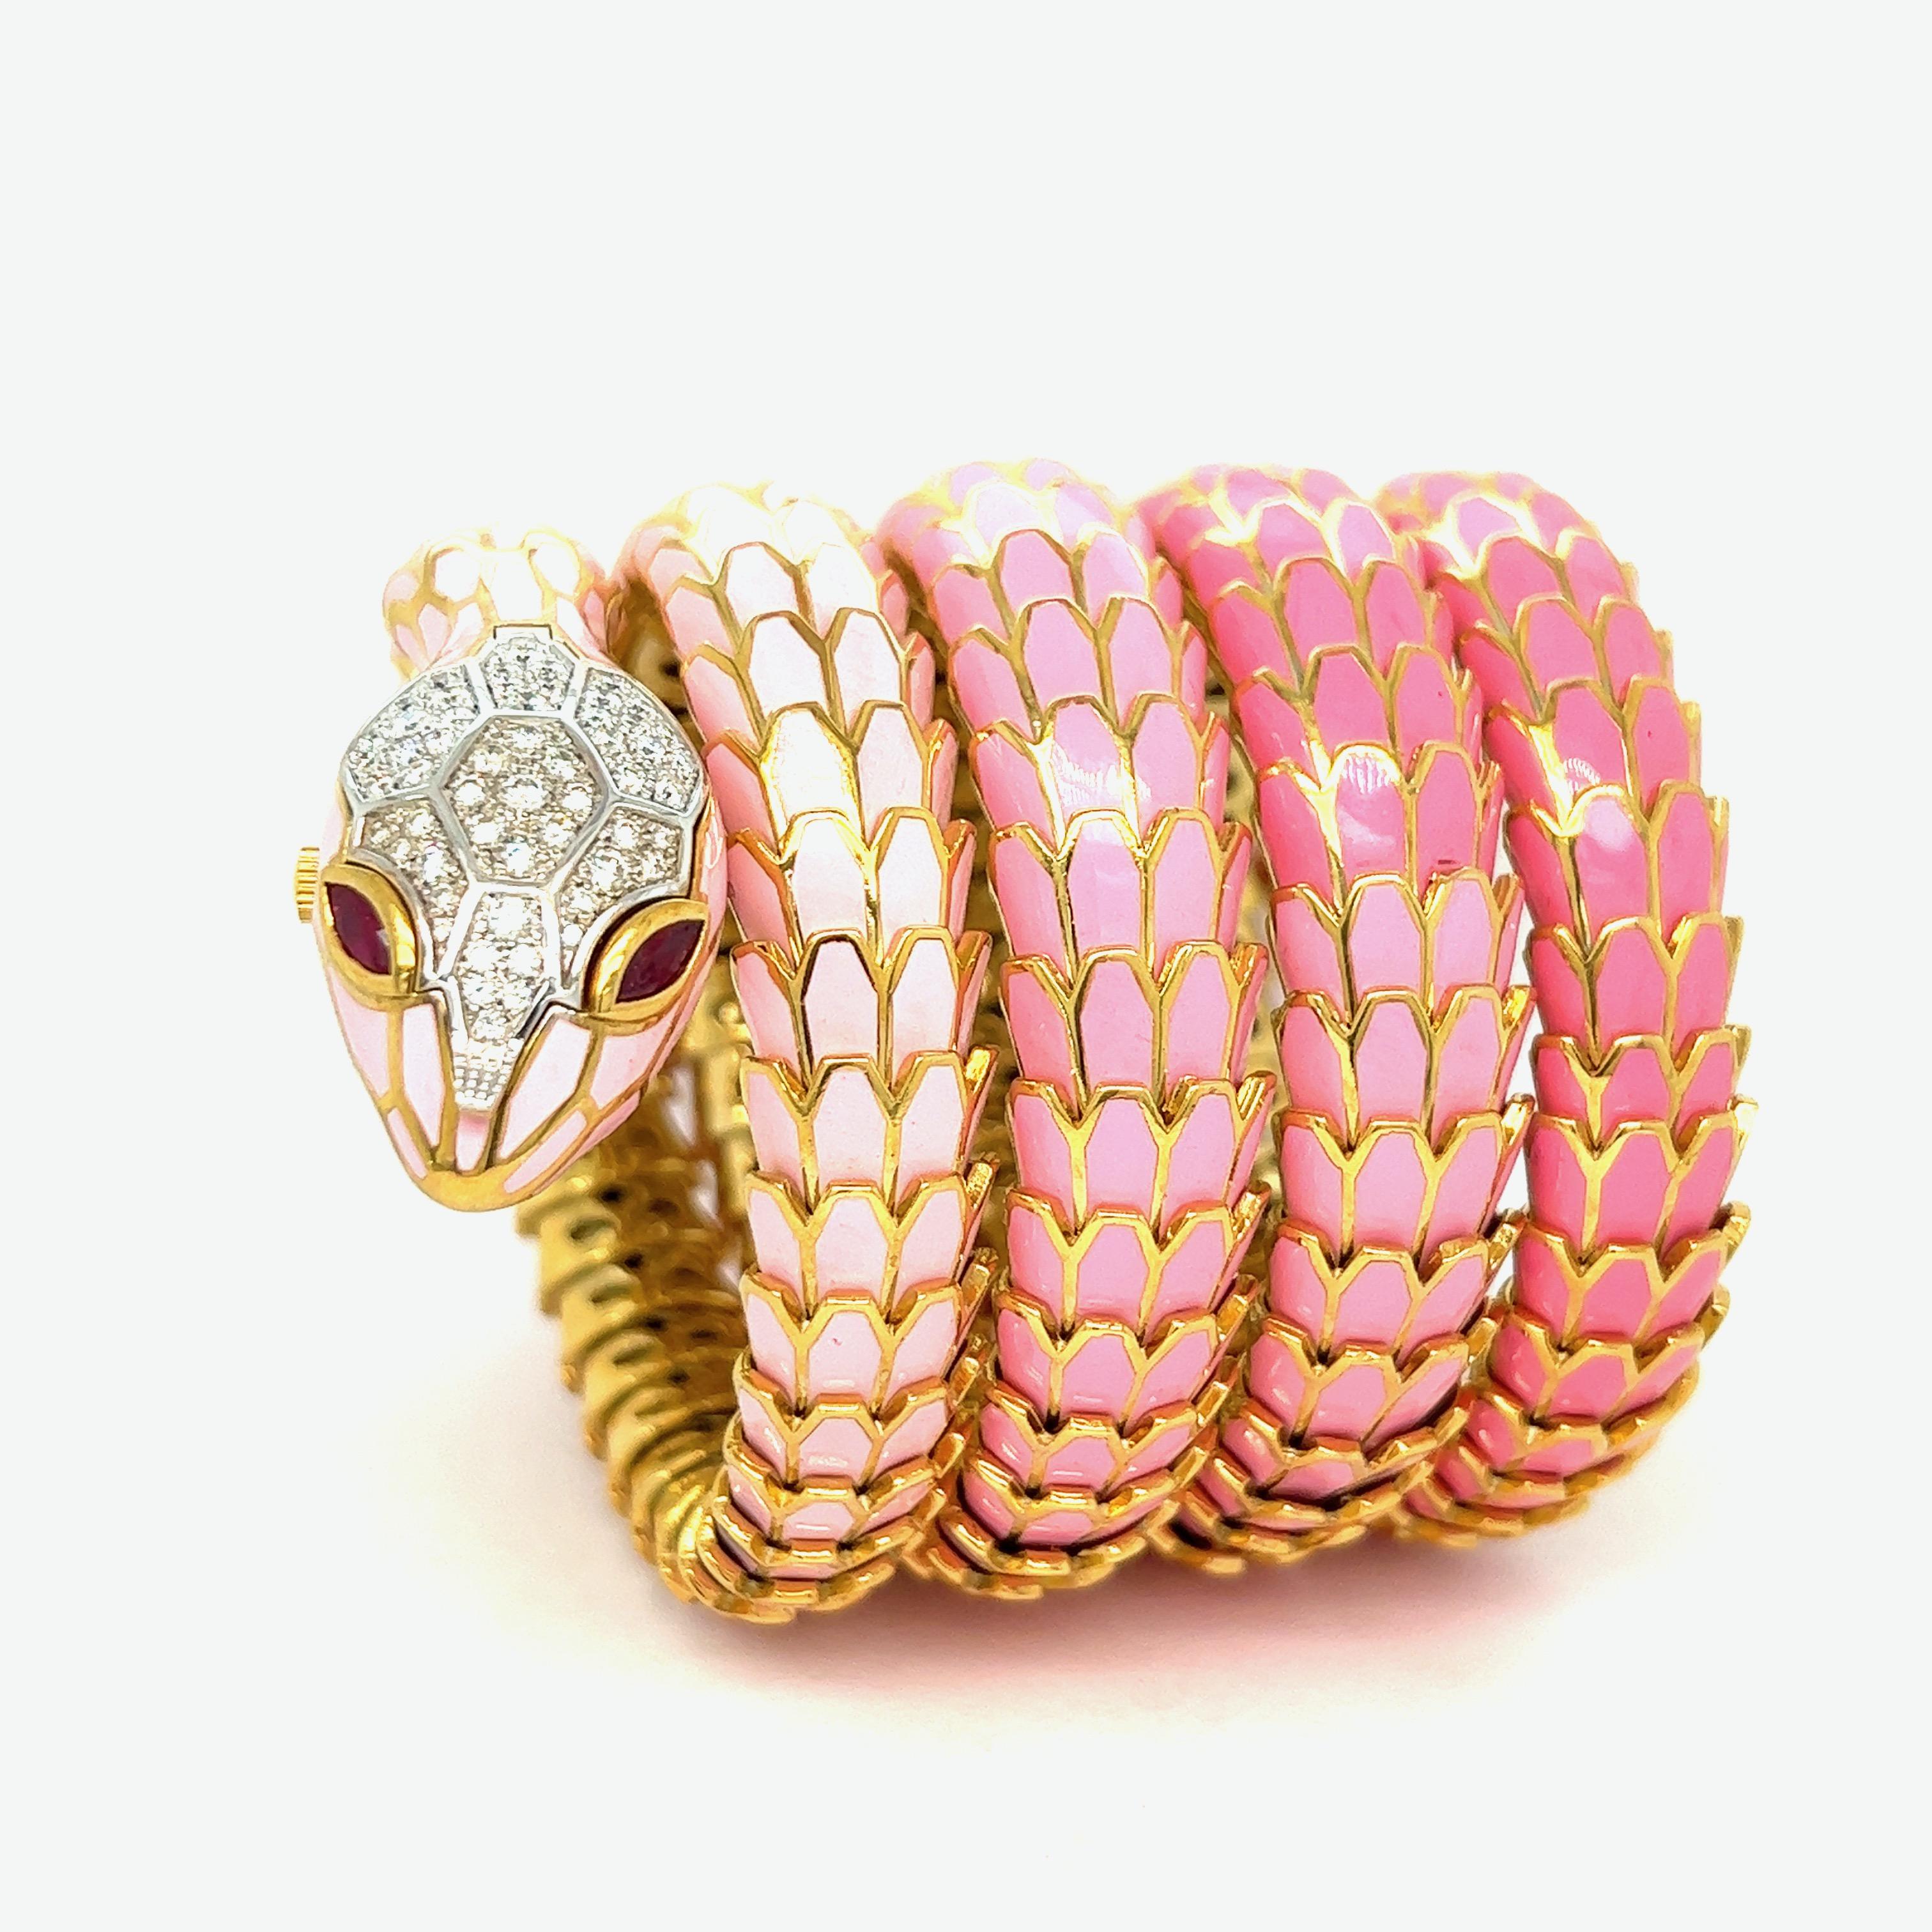 Ombré light and dark pink enamel wrap watch snake bracelet, 5 rows

Round-cut diamonds of 1.10 carats, Marquise-shaped rubies of 0.56 carat, 18 karat white gold, silver with a tone of yellow gold; marked 750, 925, D. 1.10, R. 0.56,